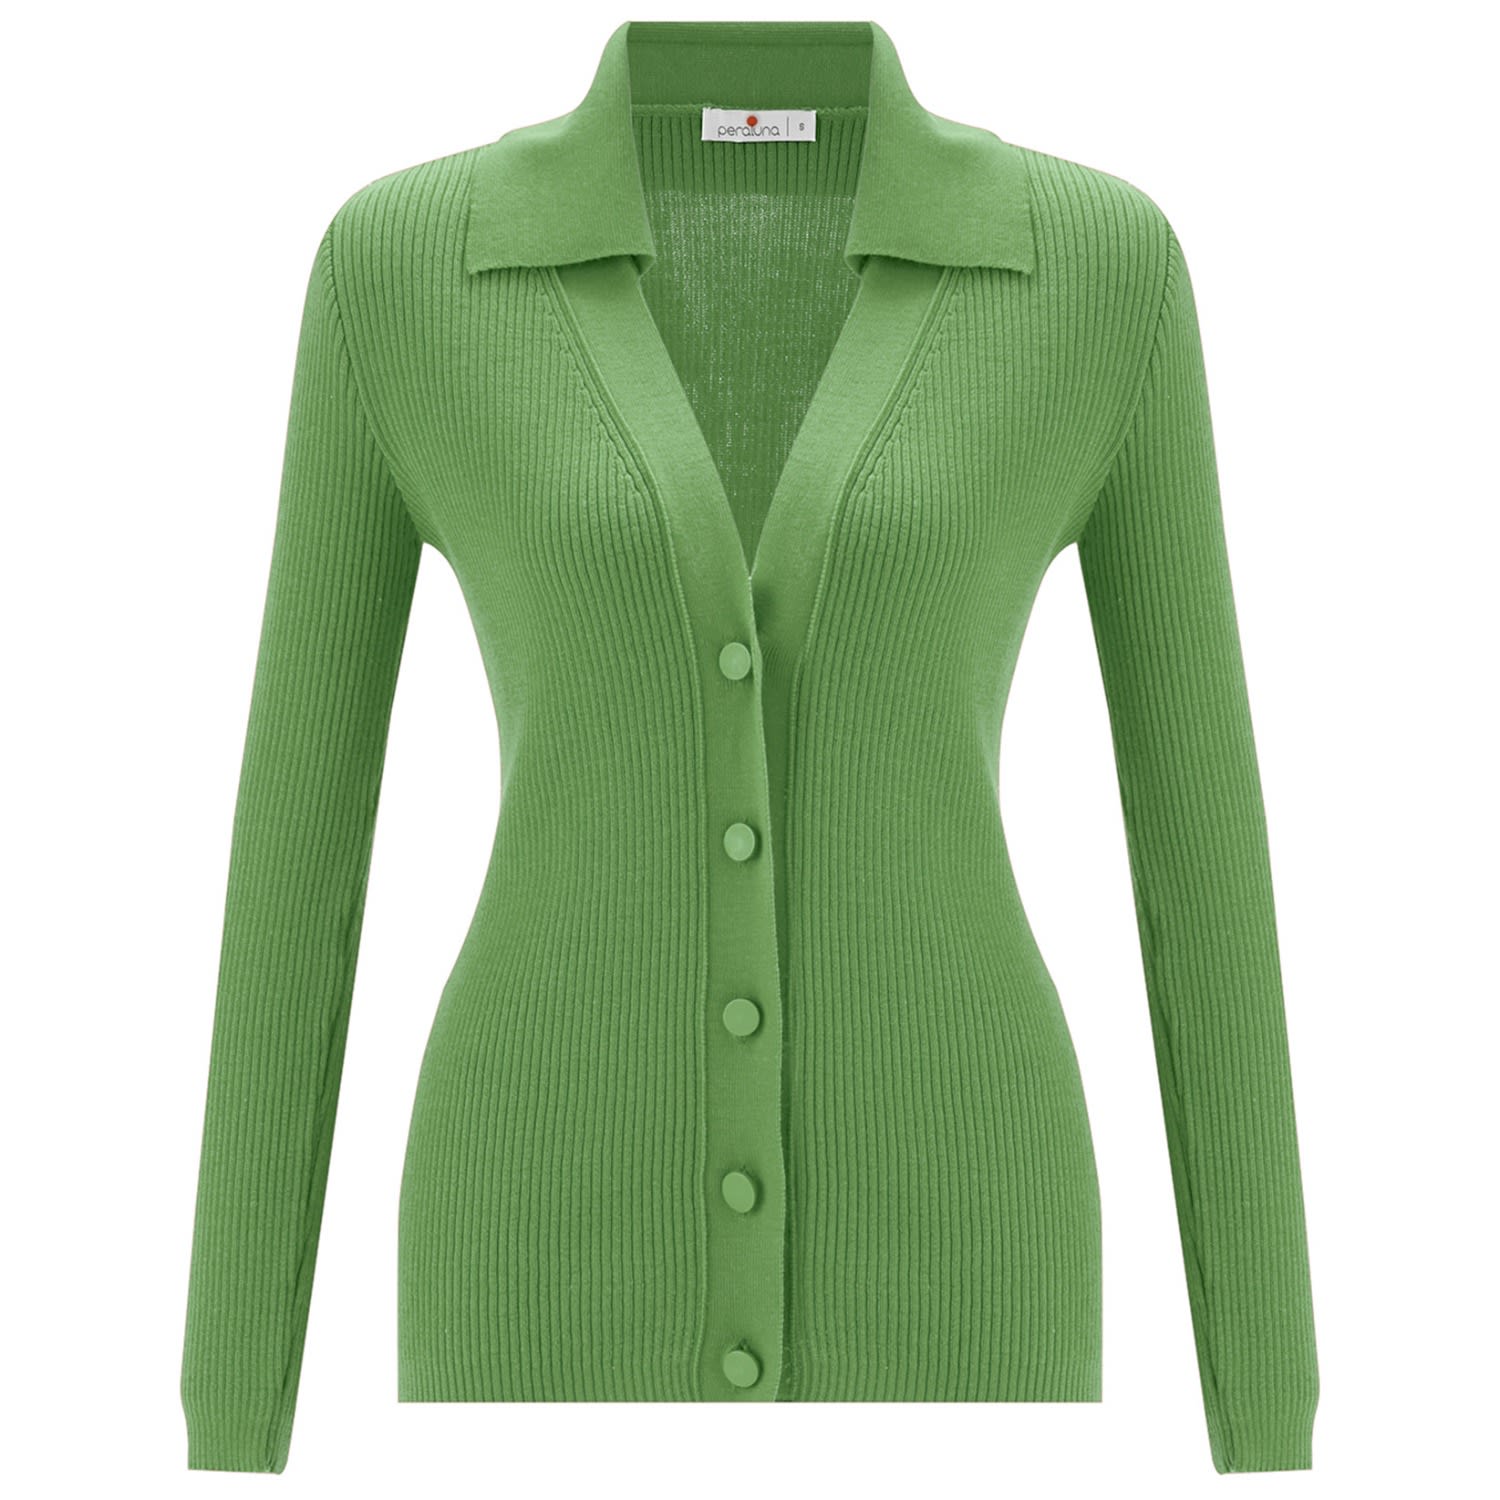 Women’s Polo V-Neck Ribbed Knit Cardigan - Bay Leaf Green Extra Large Peraluna